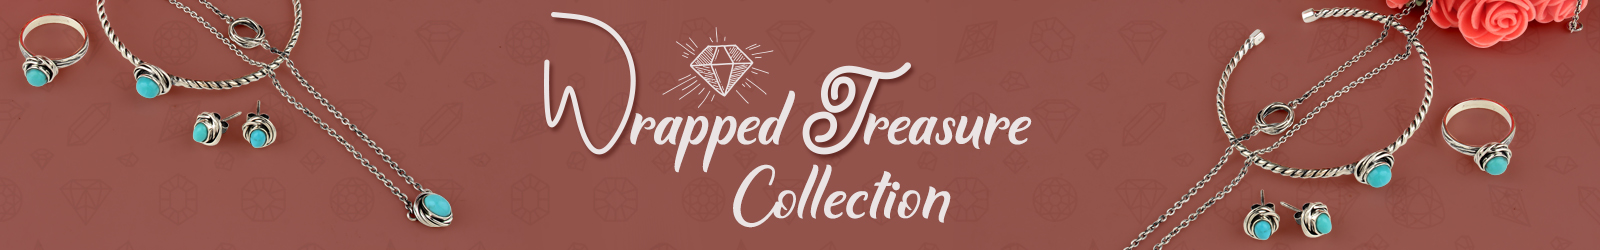 Wrapped Treasure Jewellery Collection